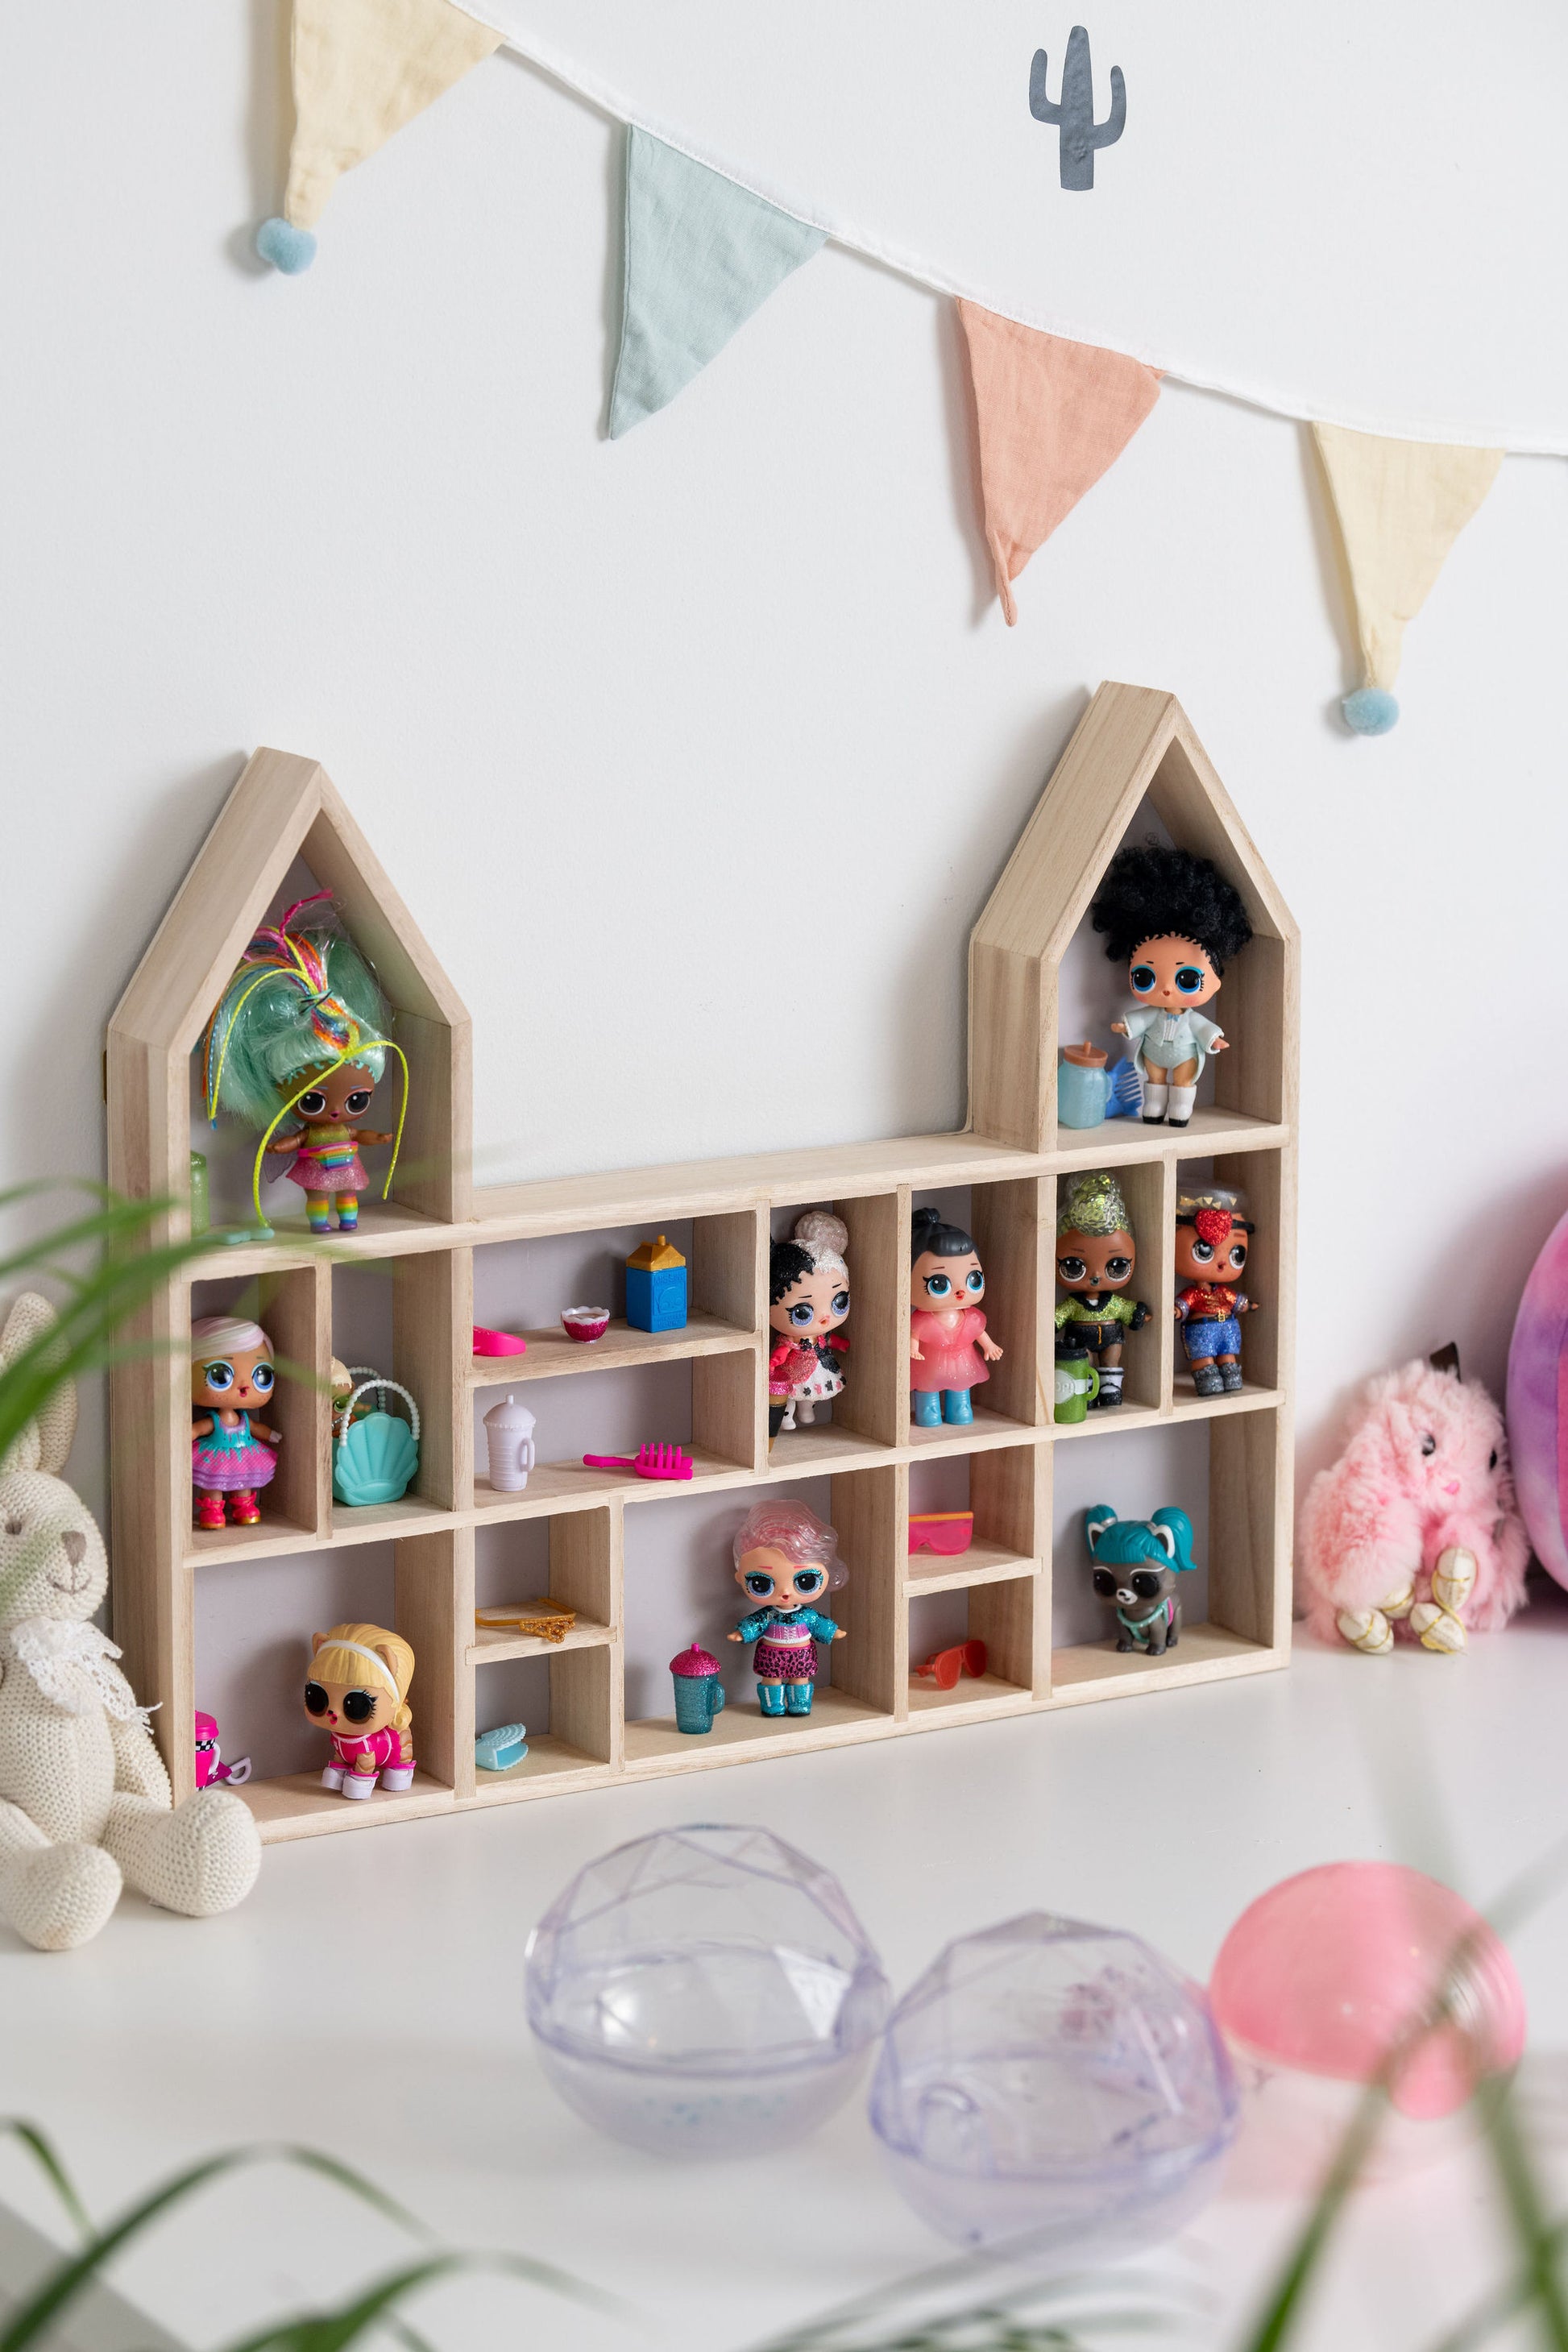 LOL dolls in a castle-shaped wooden toy display shelf with a gray-colored backboard (side view)